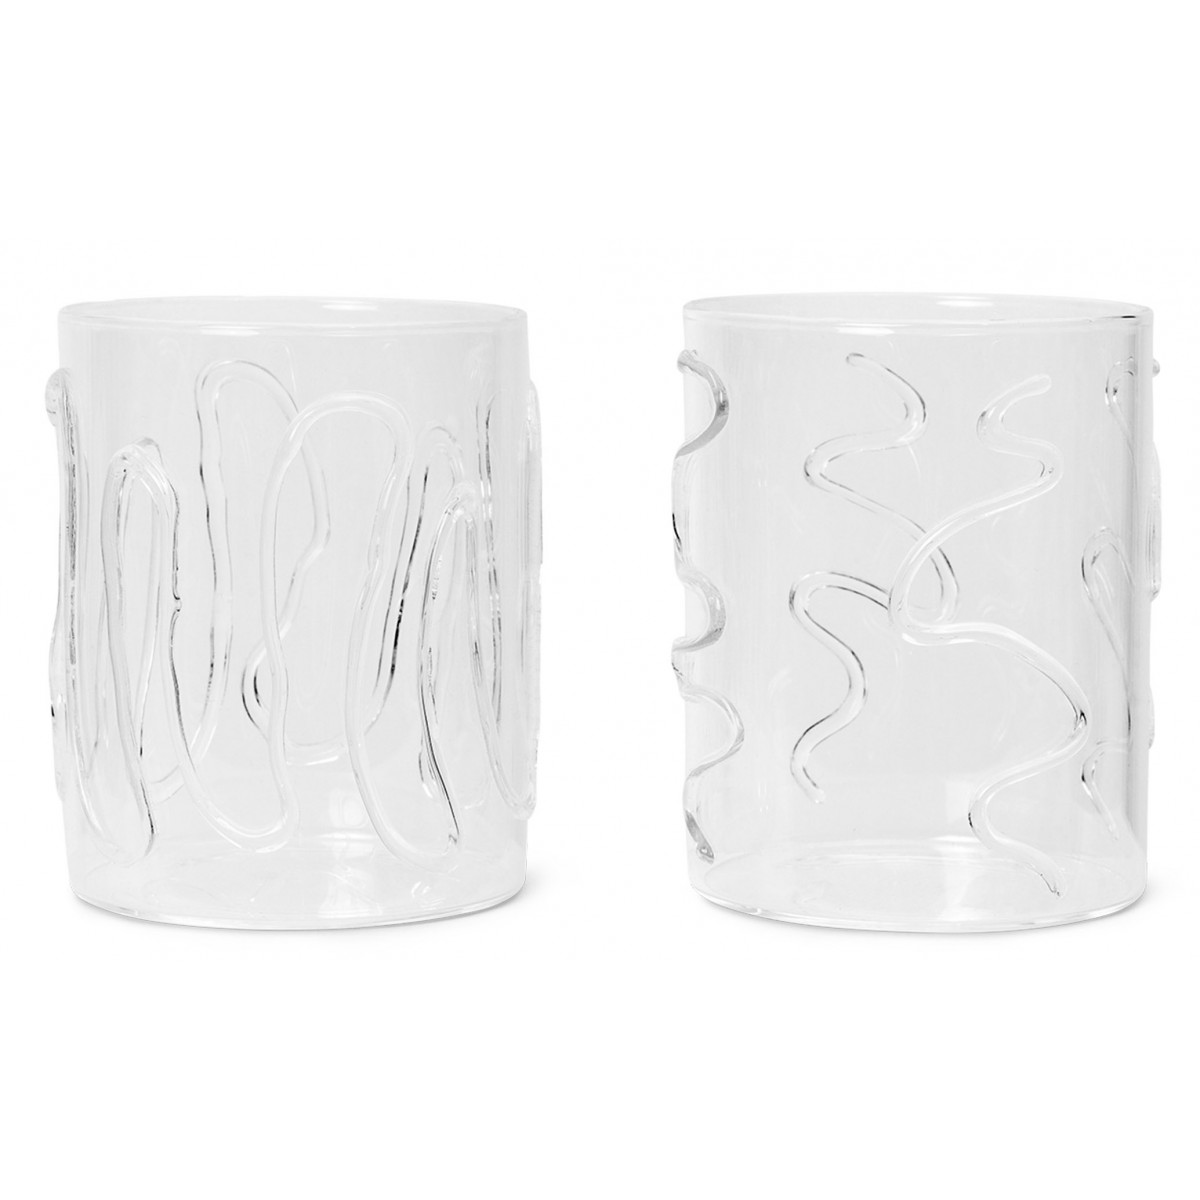 Doodle set of 2 glasses - tall